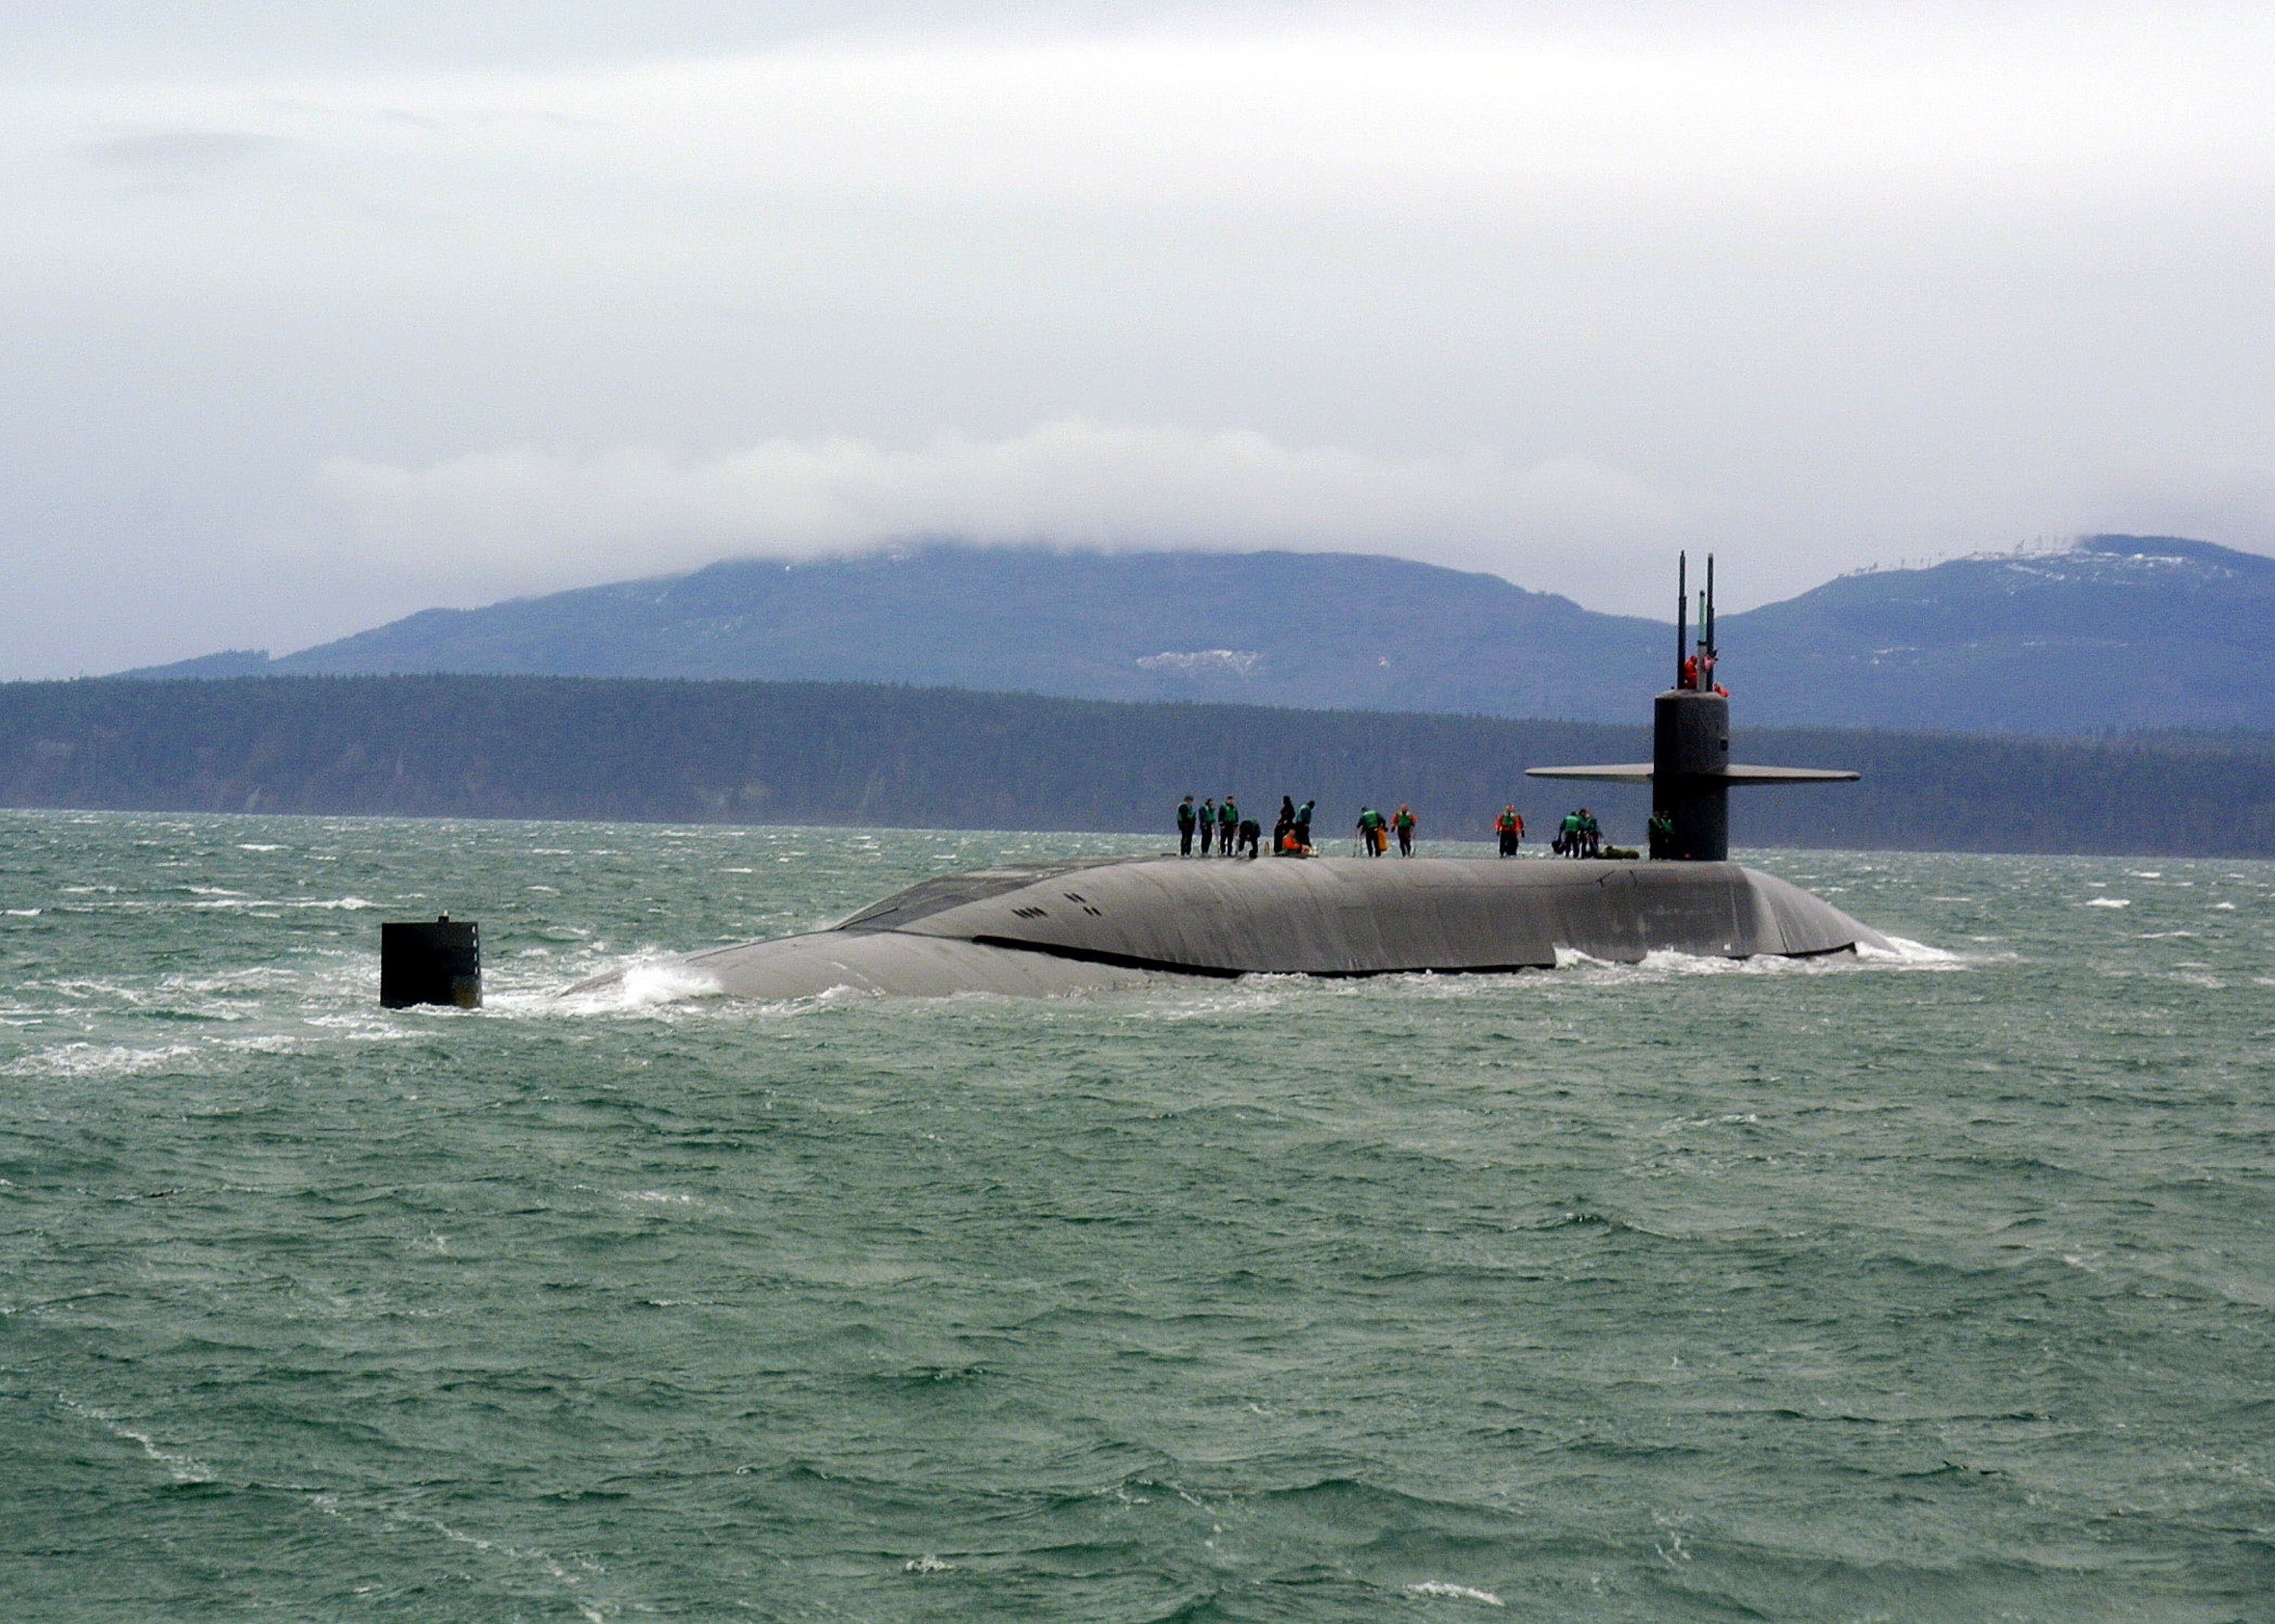 Why Ohio-Class Submarines Are Arguably the Most Destructive Weapons on the Planet